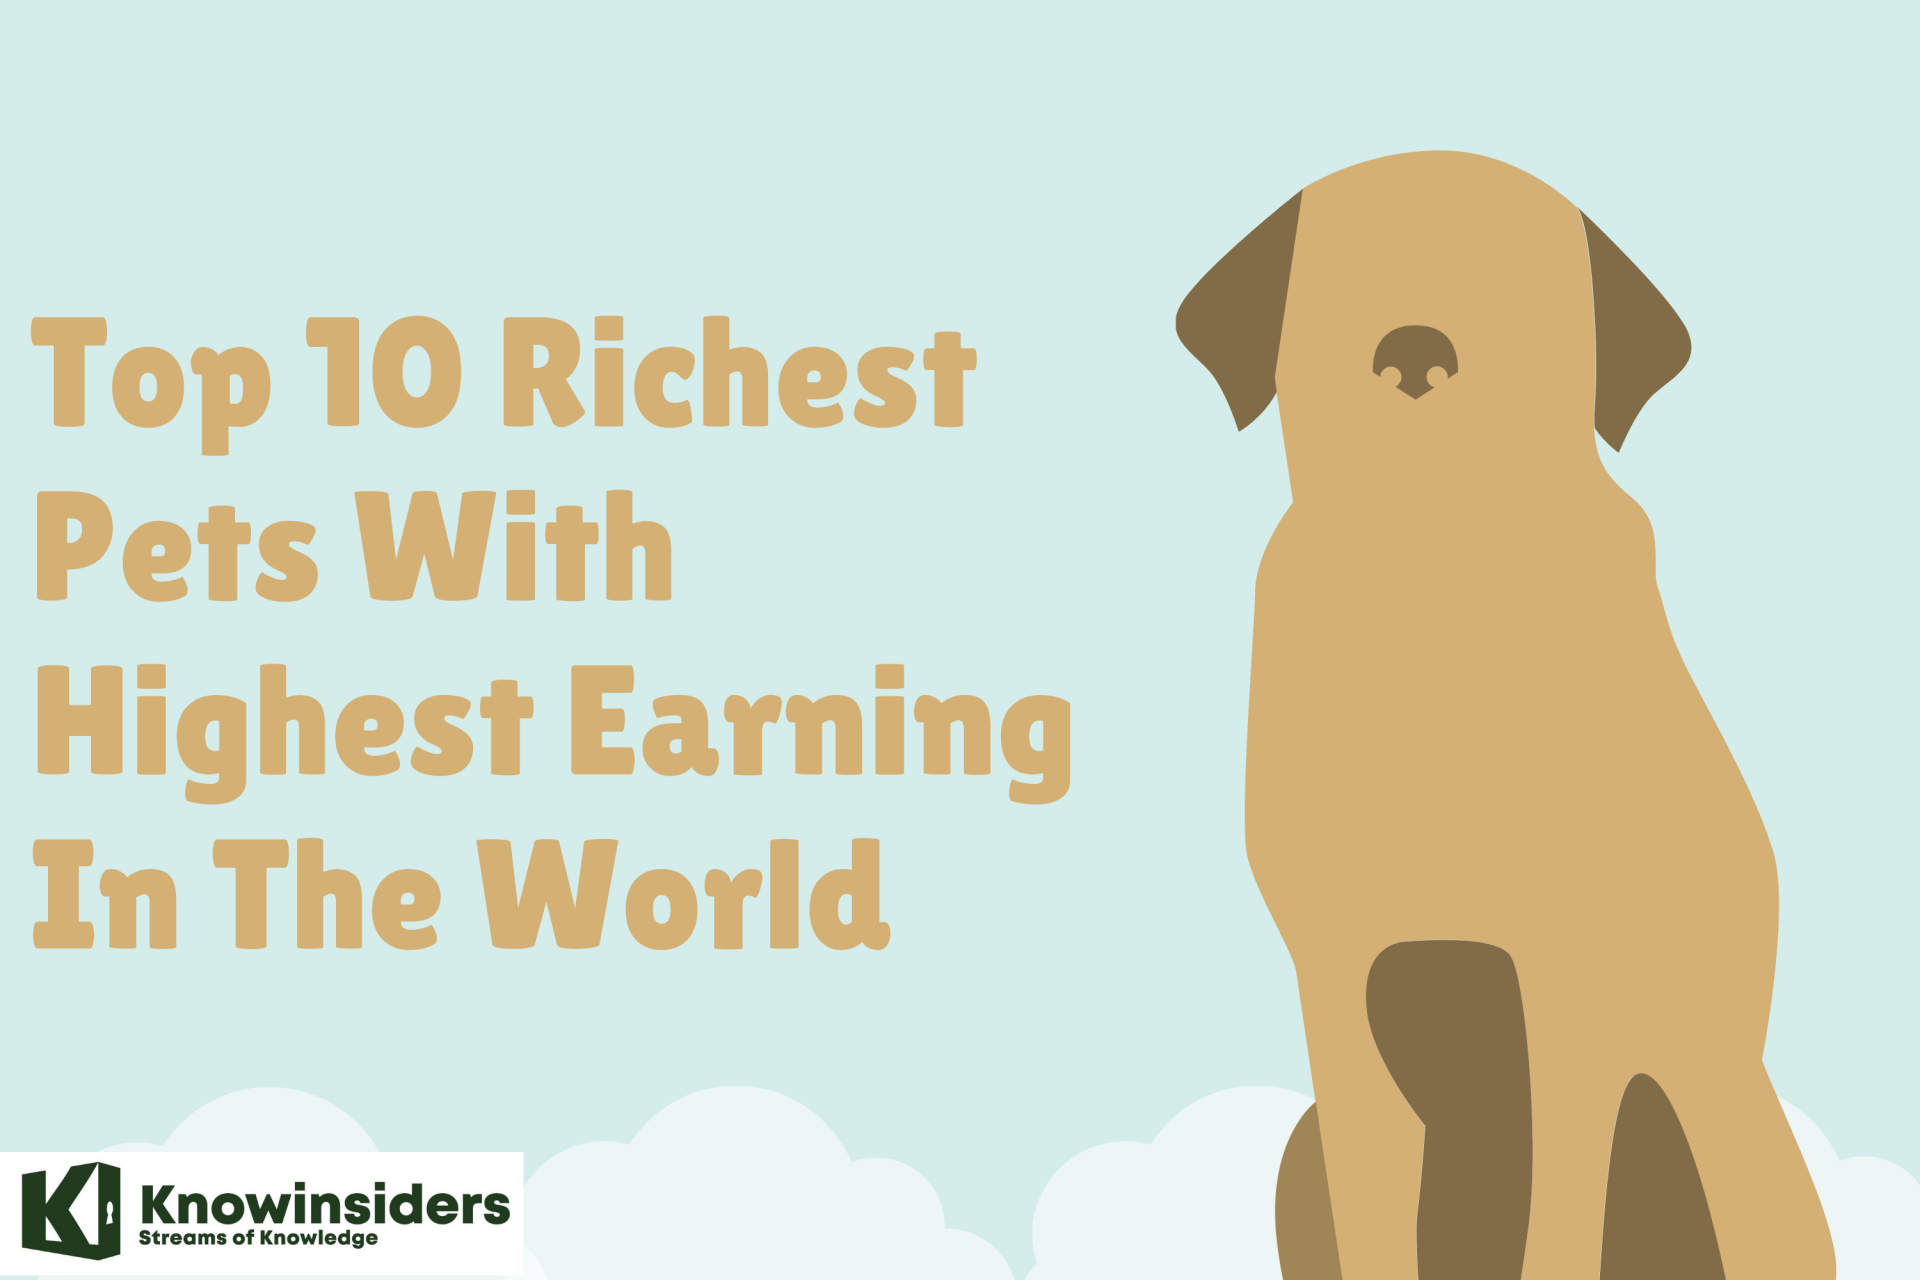 Top 10 Richest Pets With Highest Earning In The World